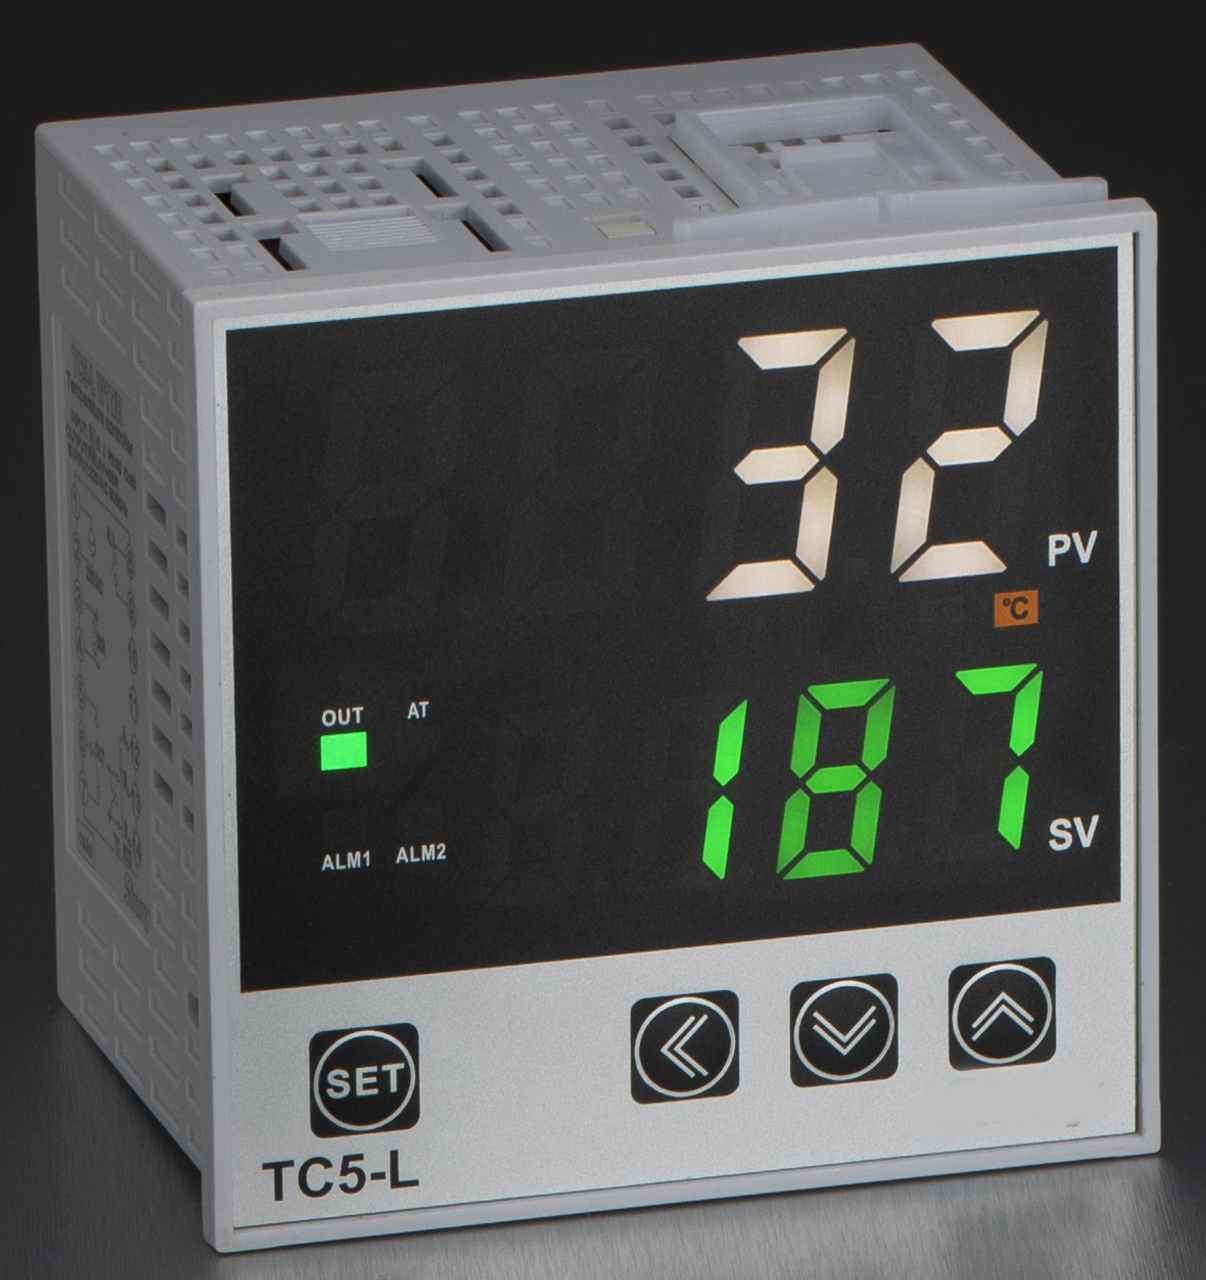 TC5-L-1U-2-T/R-2 PID Controller, 100-240VAC with 2 3 Amp Relay Alarms, K,E,J Thermocouple, Pt100 or Cu20, Optional Linear Current/Voltage, 96x96mm,0-10V Output